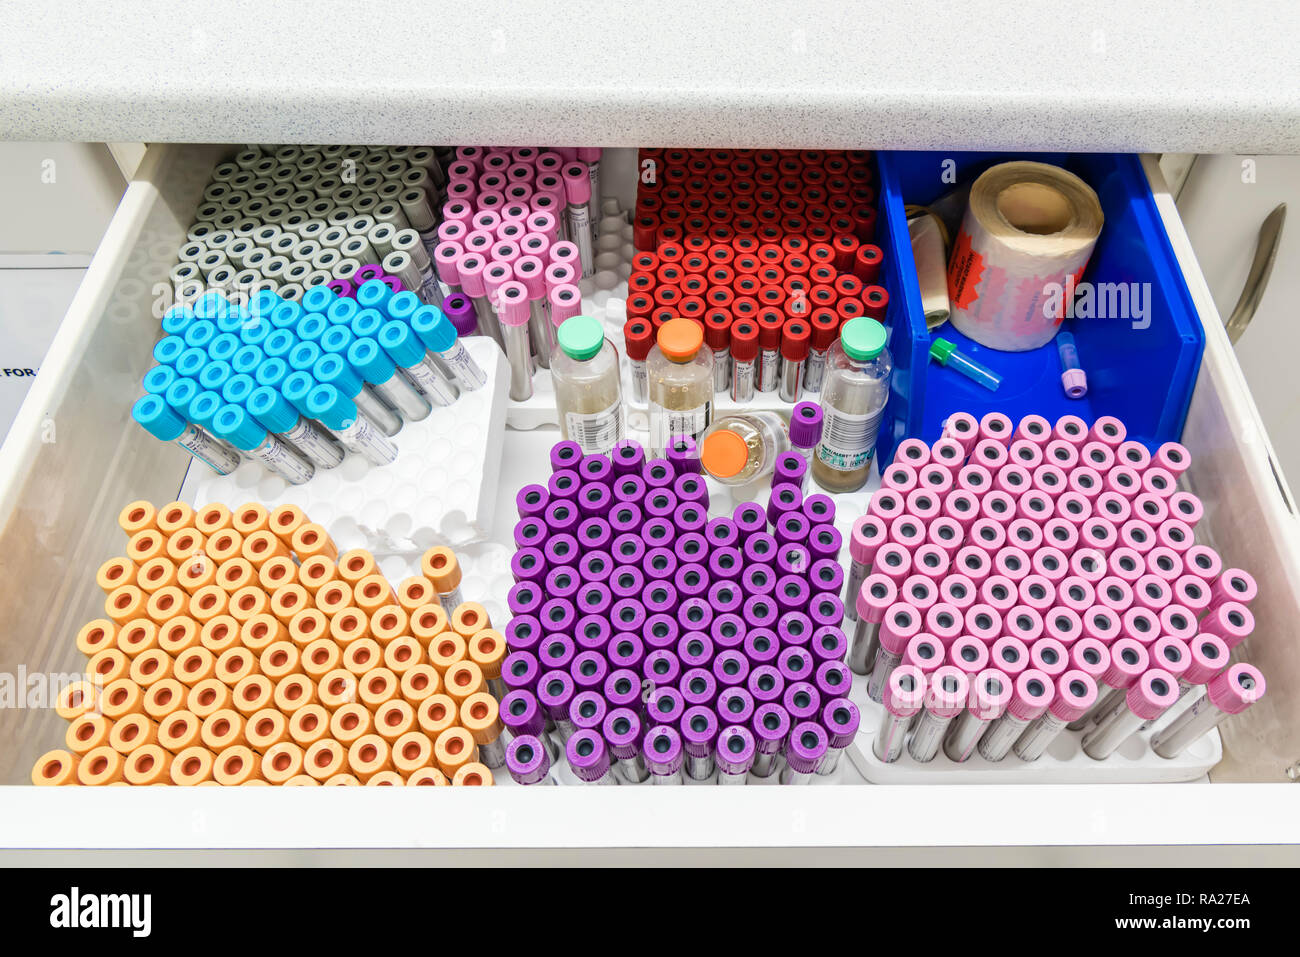 Drawer in a hospital treatment room containing different types of Vacutainers for taking blood samples. Stock Photo